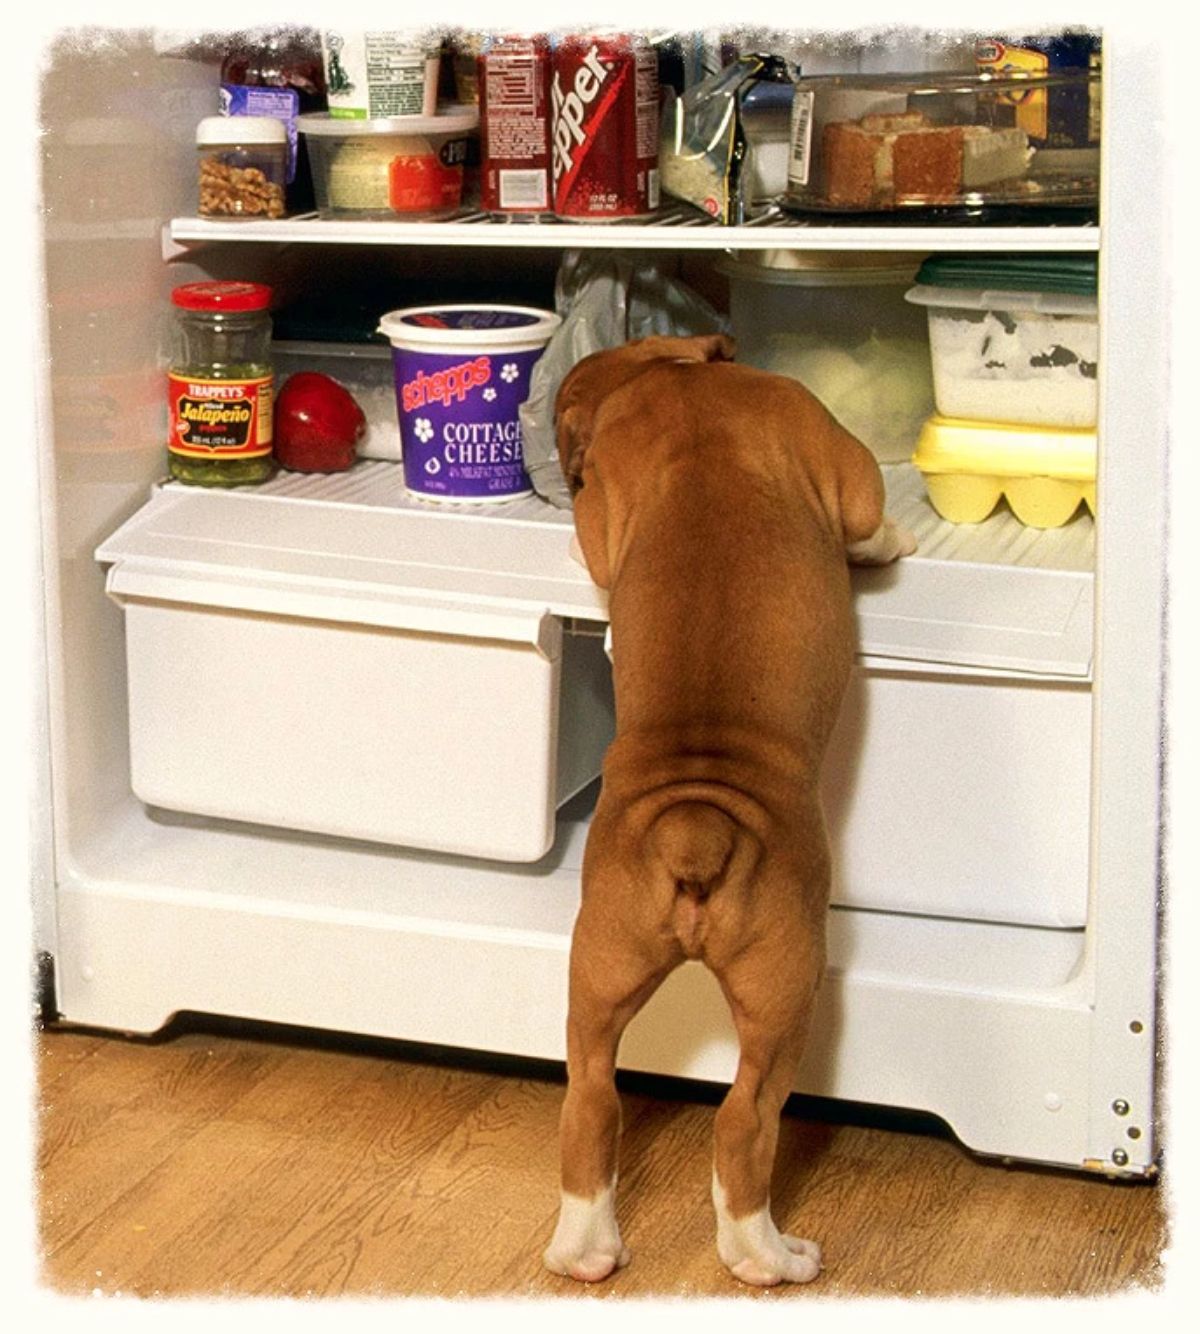 small brown dog standing on hind legs and looking into a fridge and its products